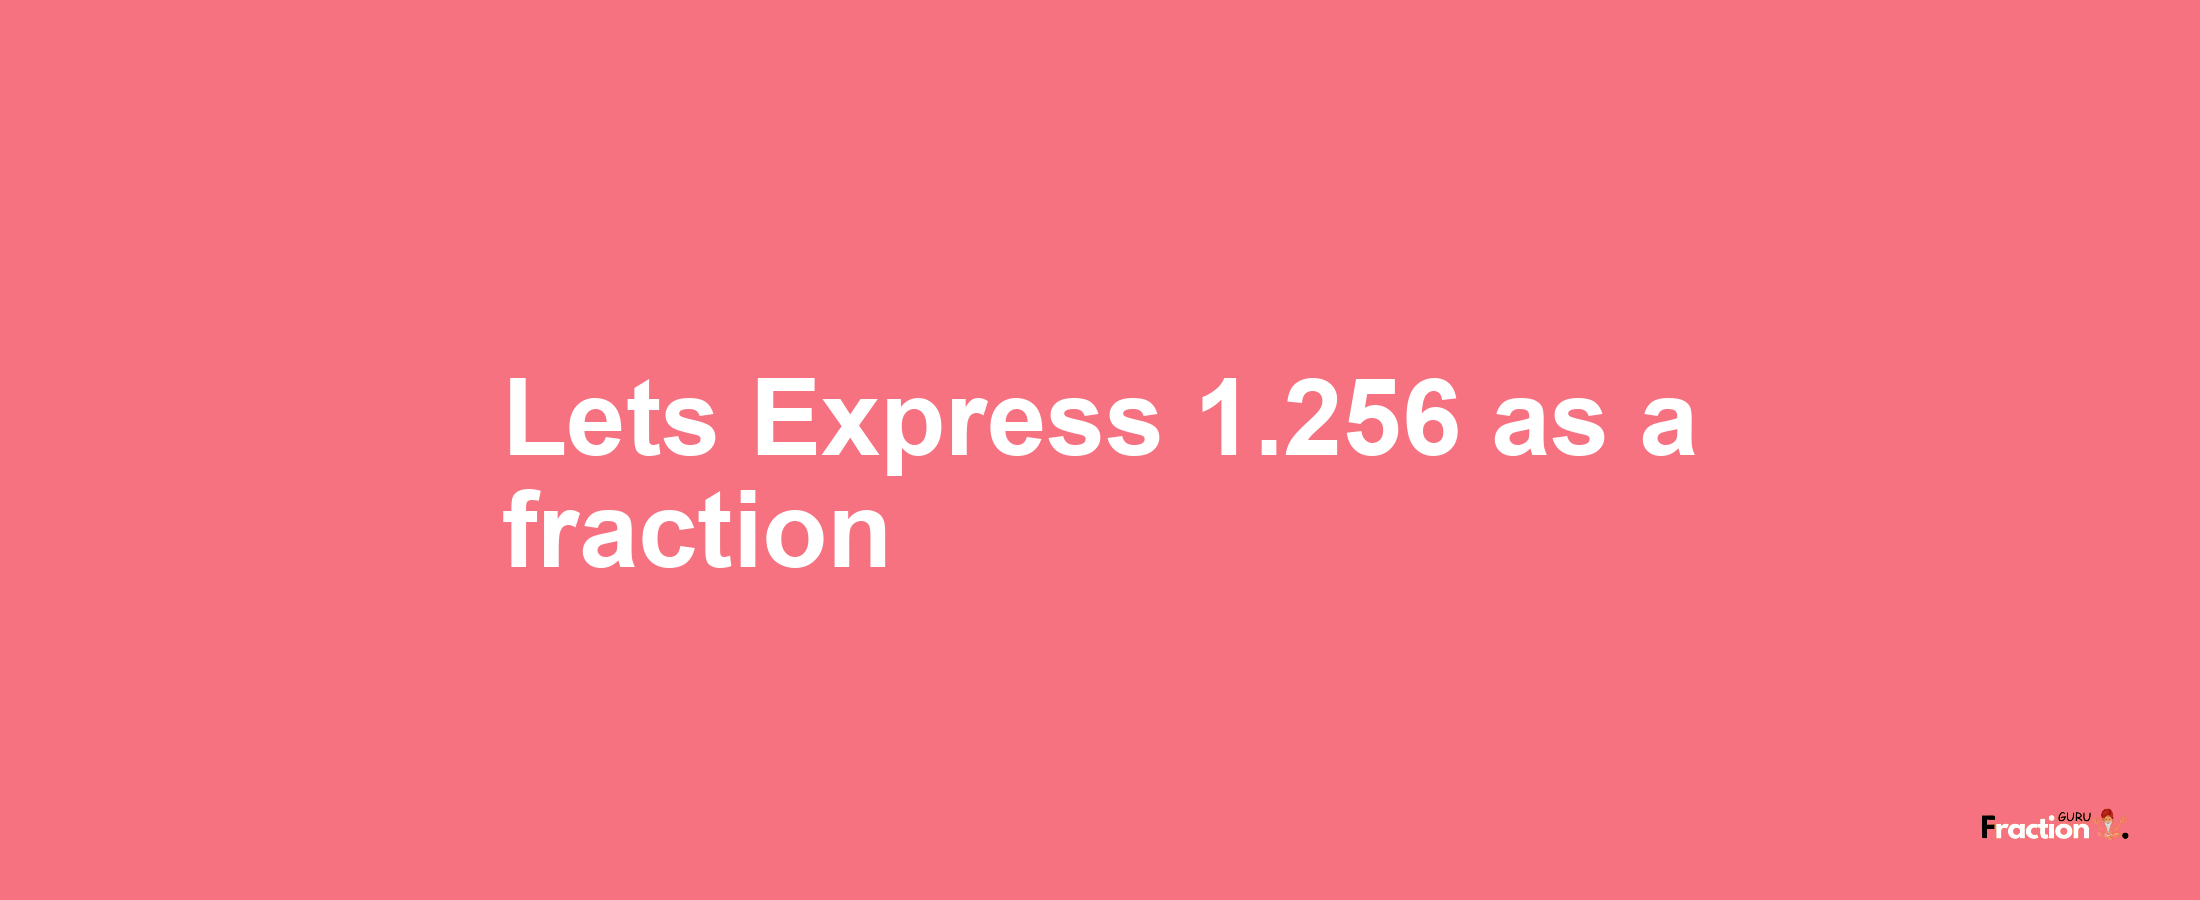 Lets Express 1.256 as afraction